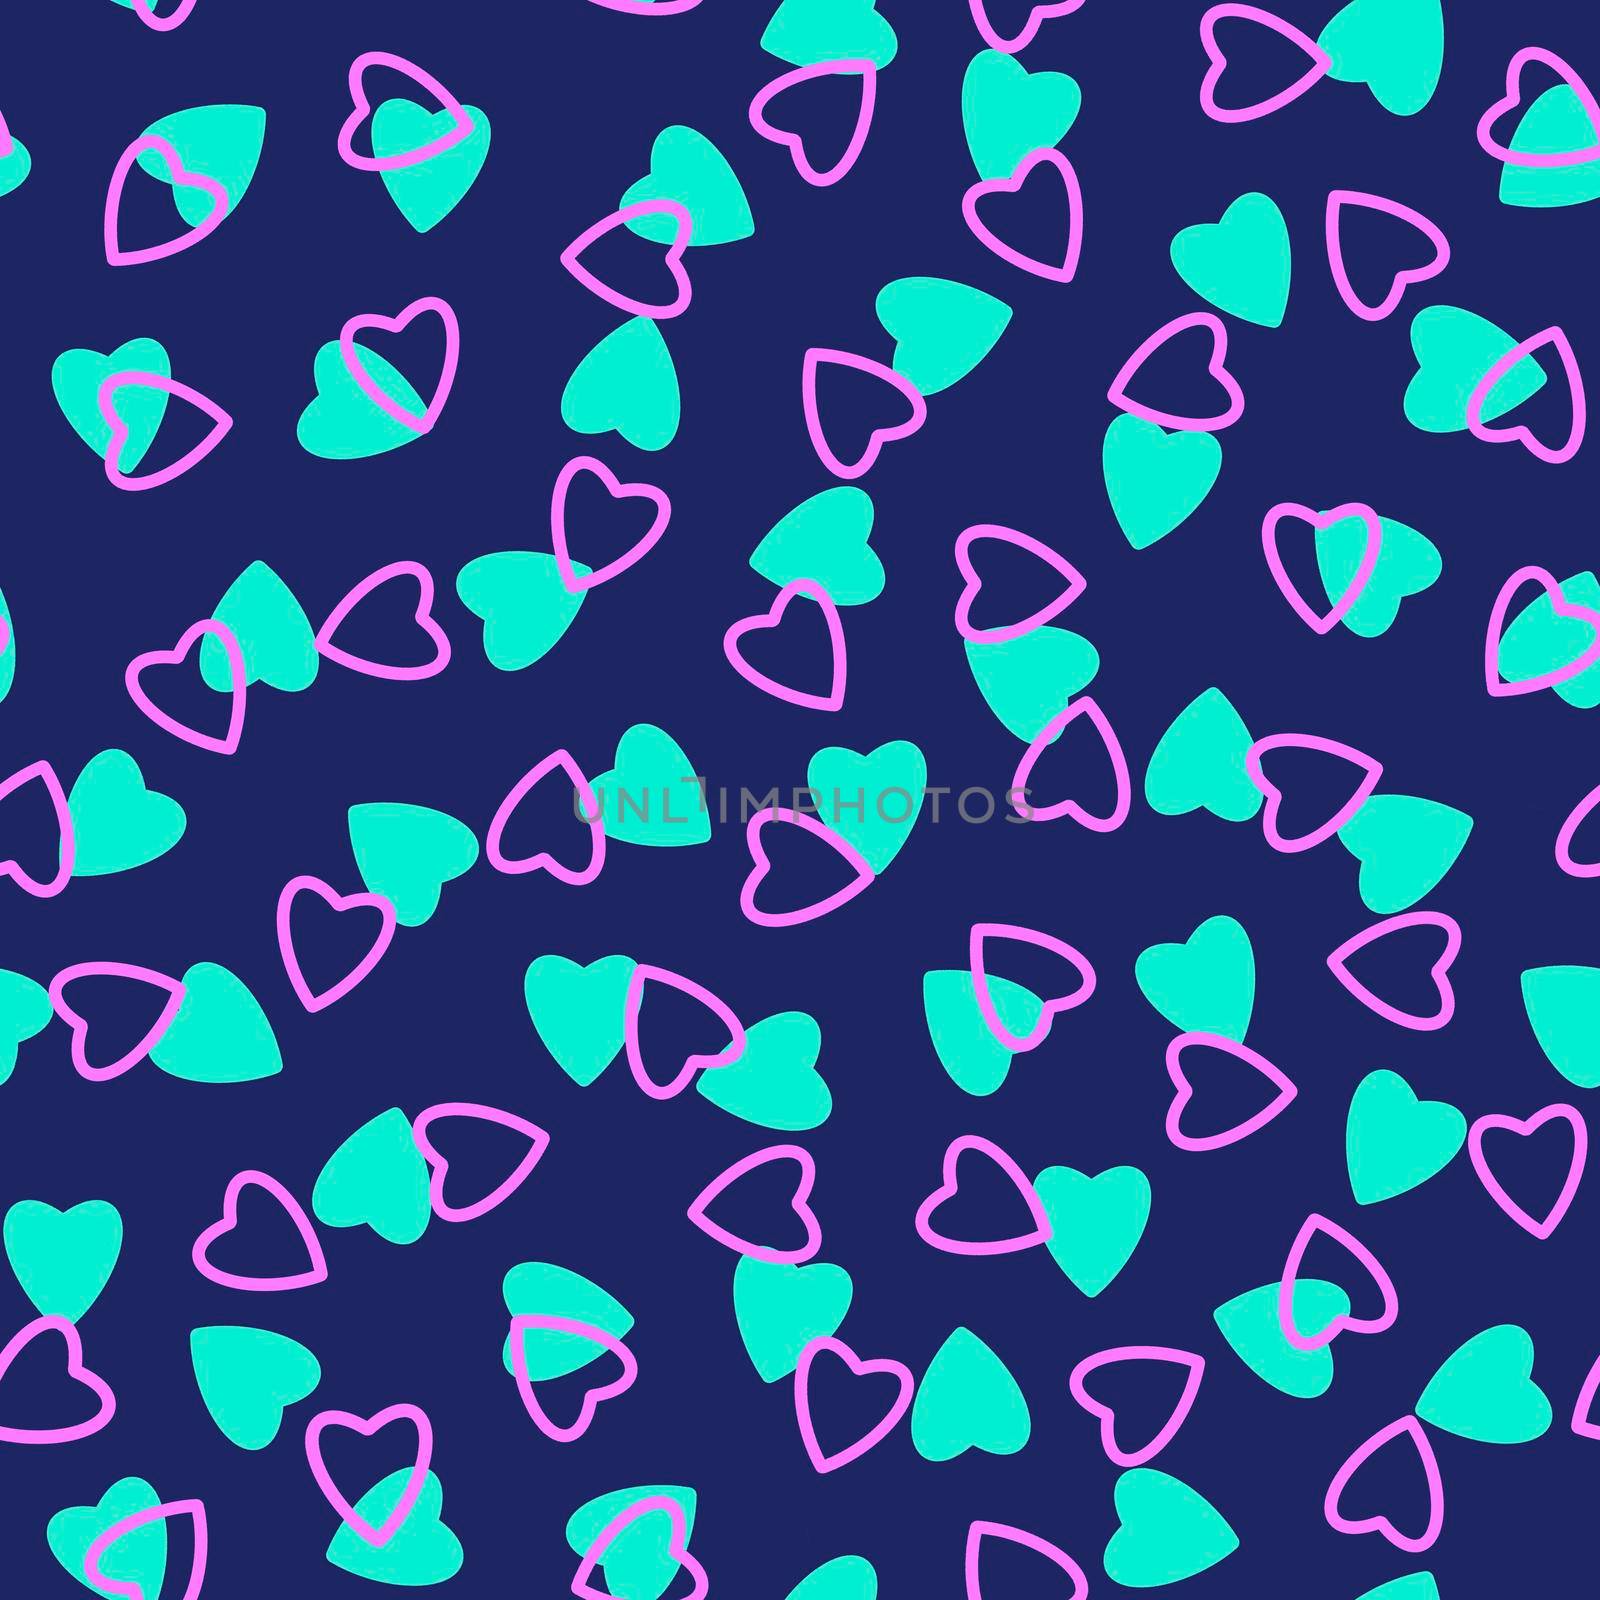 Simple hearts seamless pattern,endless chaotic texture made of tiny heart silhouettes.Valentines,mothers day background.Great for Easter,wedding,scrapbook,gift wrapping paper,textile.Azure,lilac,blue.